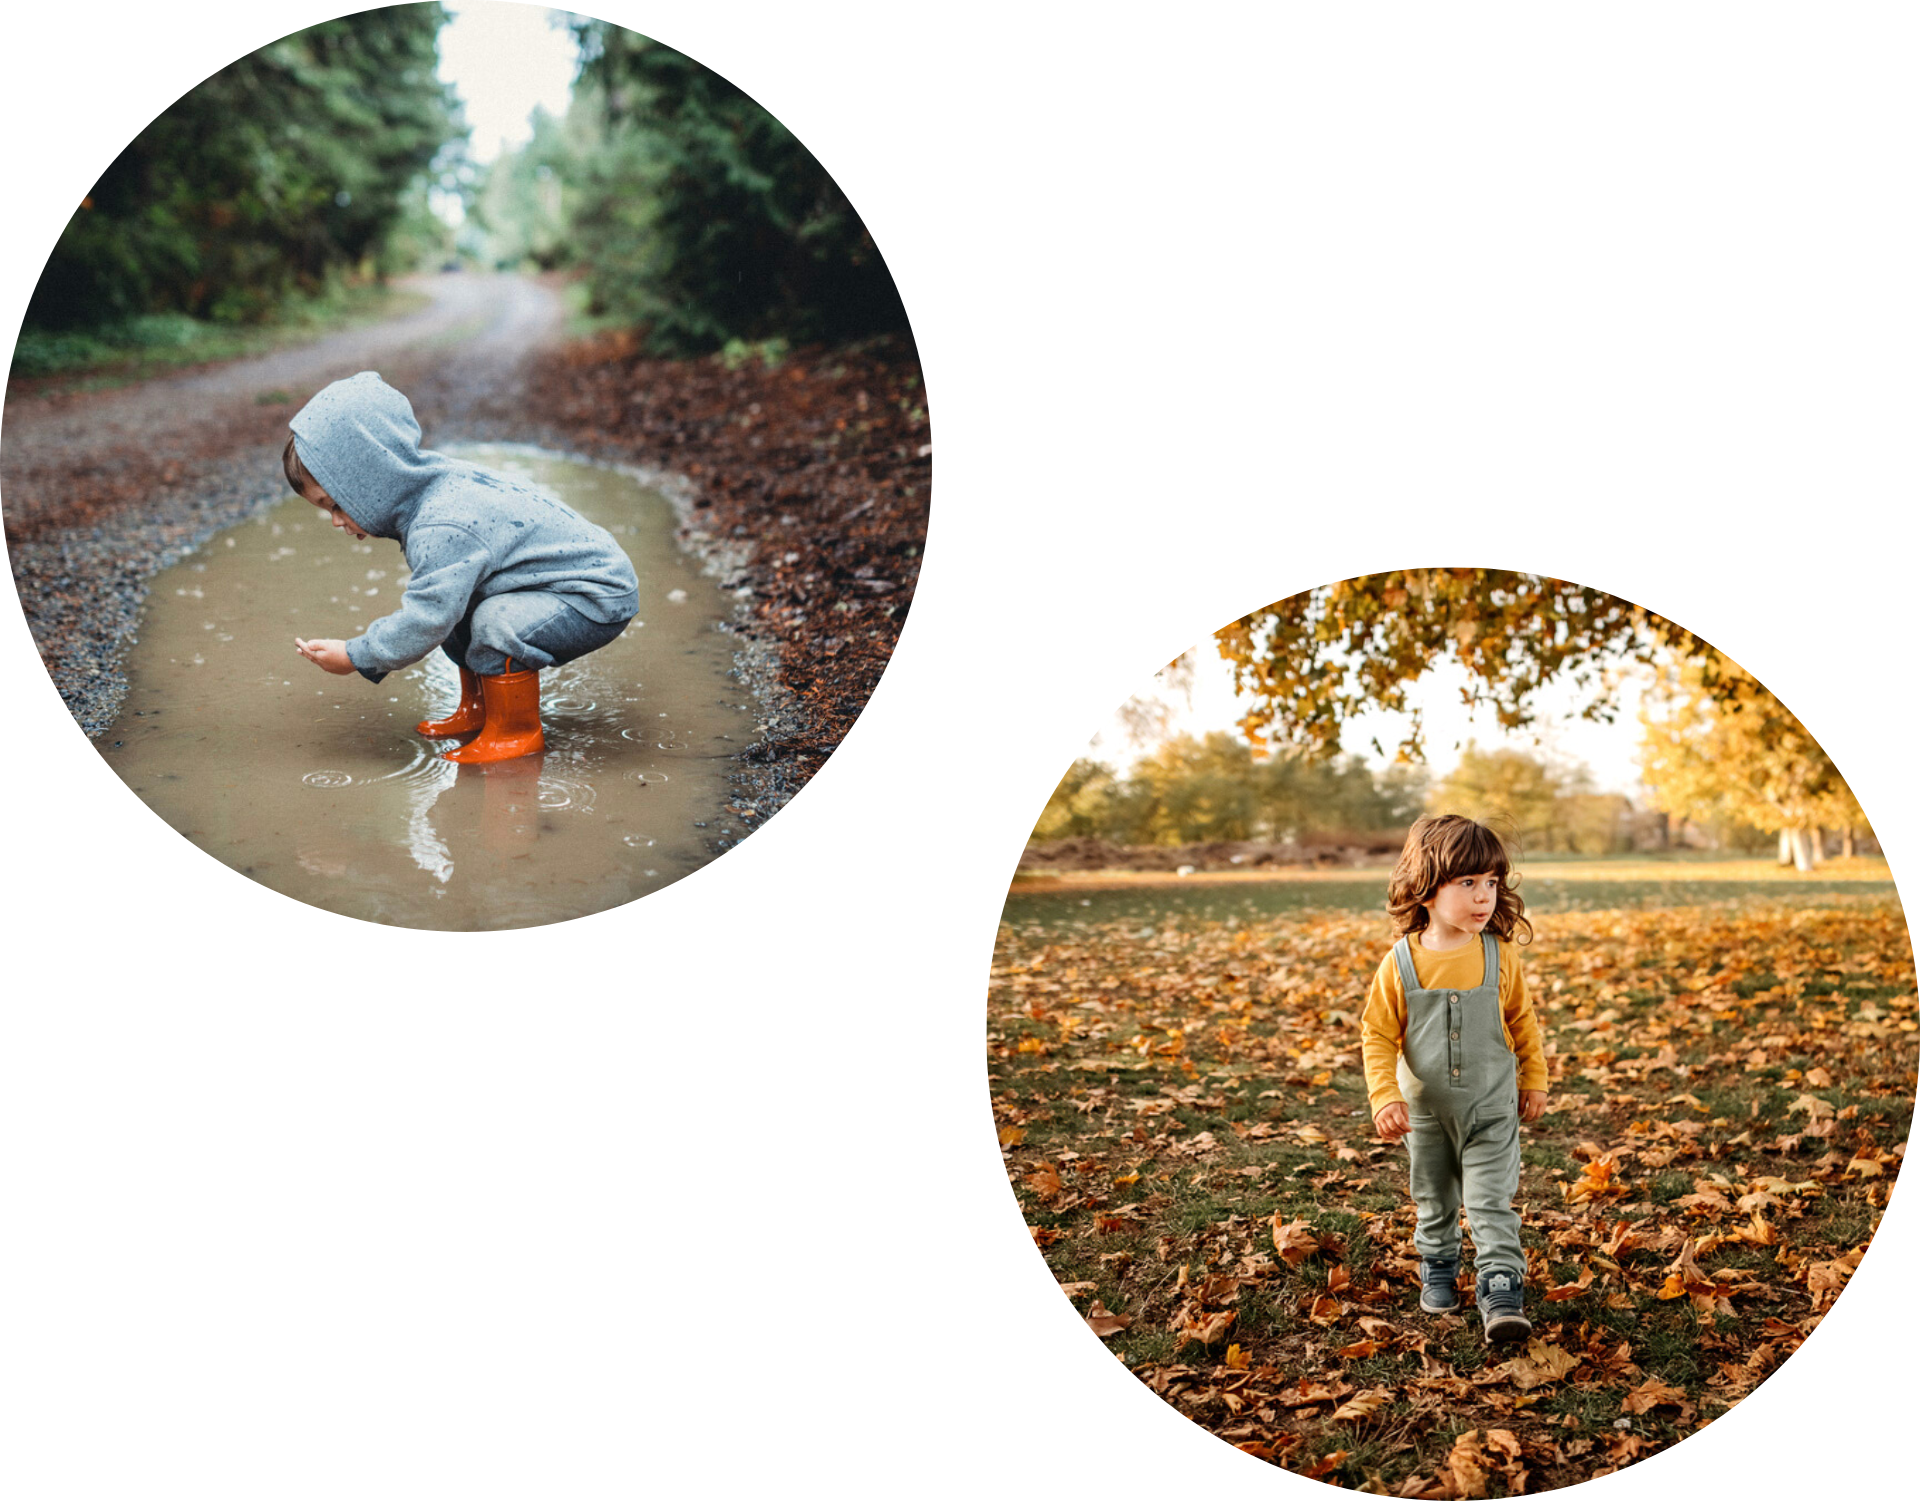 Two circular images of children playing outside - a boy wearing a ng a hoodie and red rubber boots in a puddle and a girl walking in a park among yellow fallen leaves